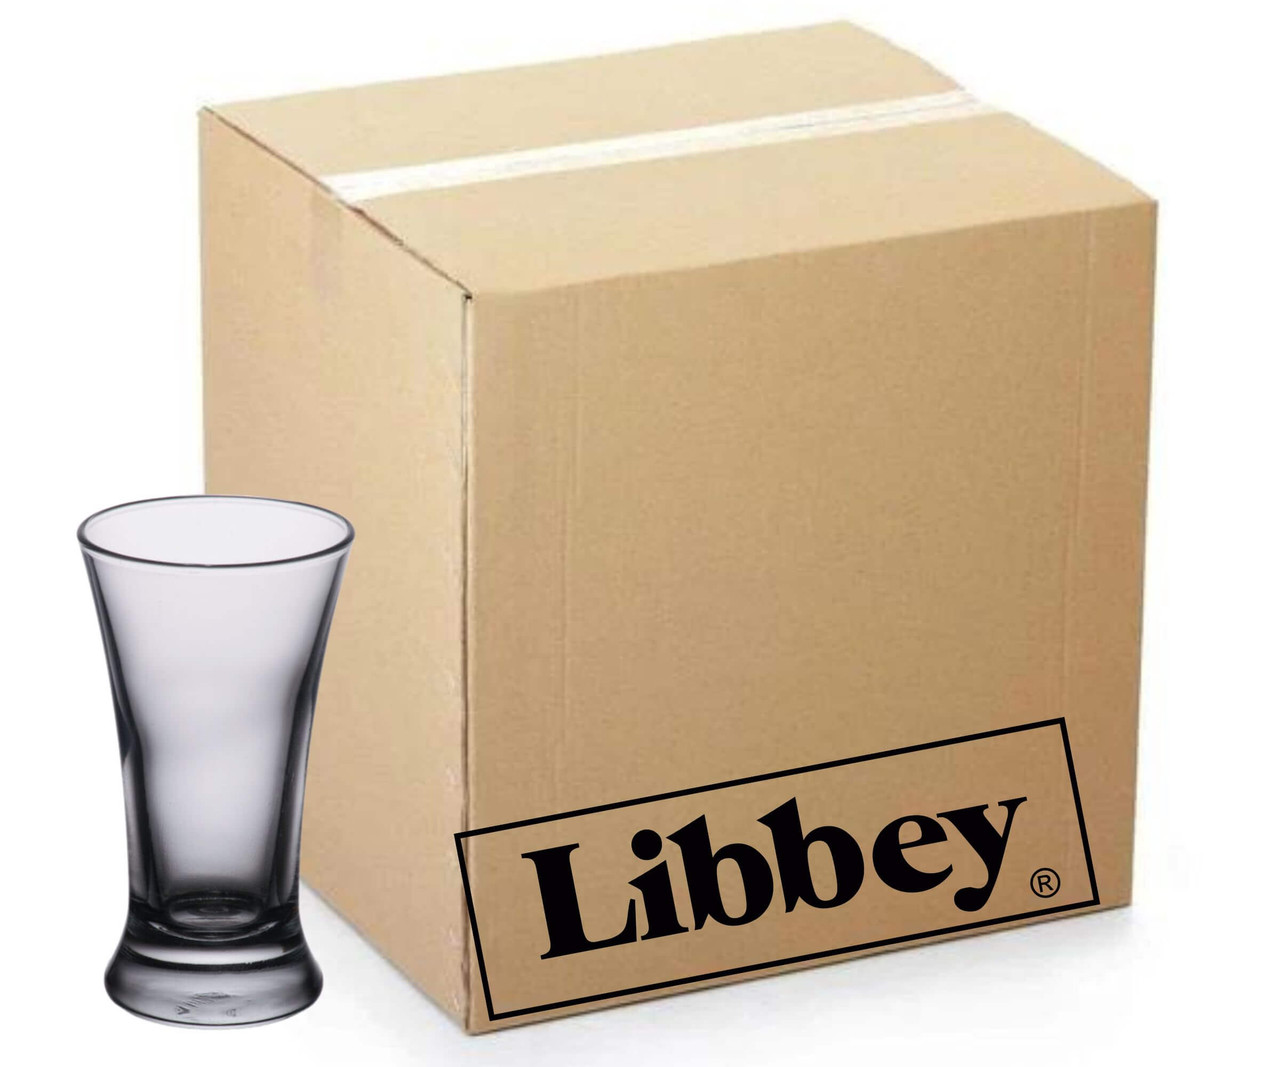 Libbey Case of 24 Flare Shooter Glasses/Beer Tasting Glasses - 2.5 oz.-Chicken Pieces